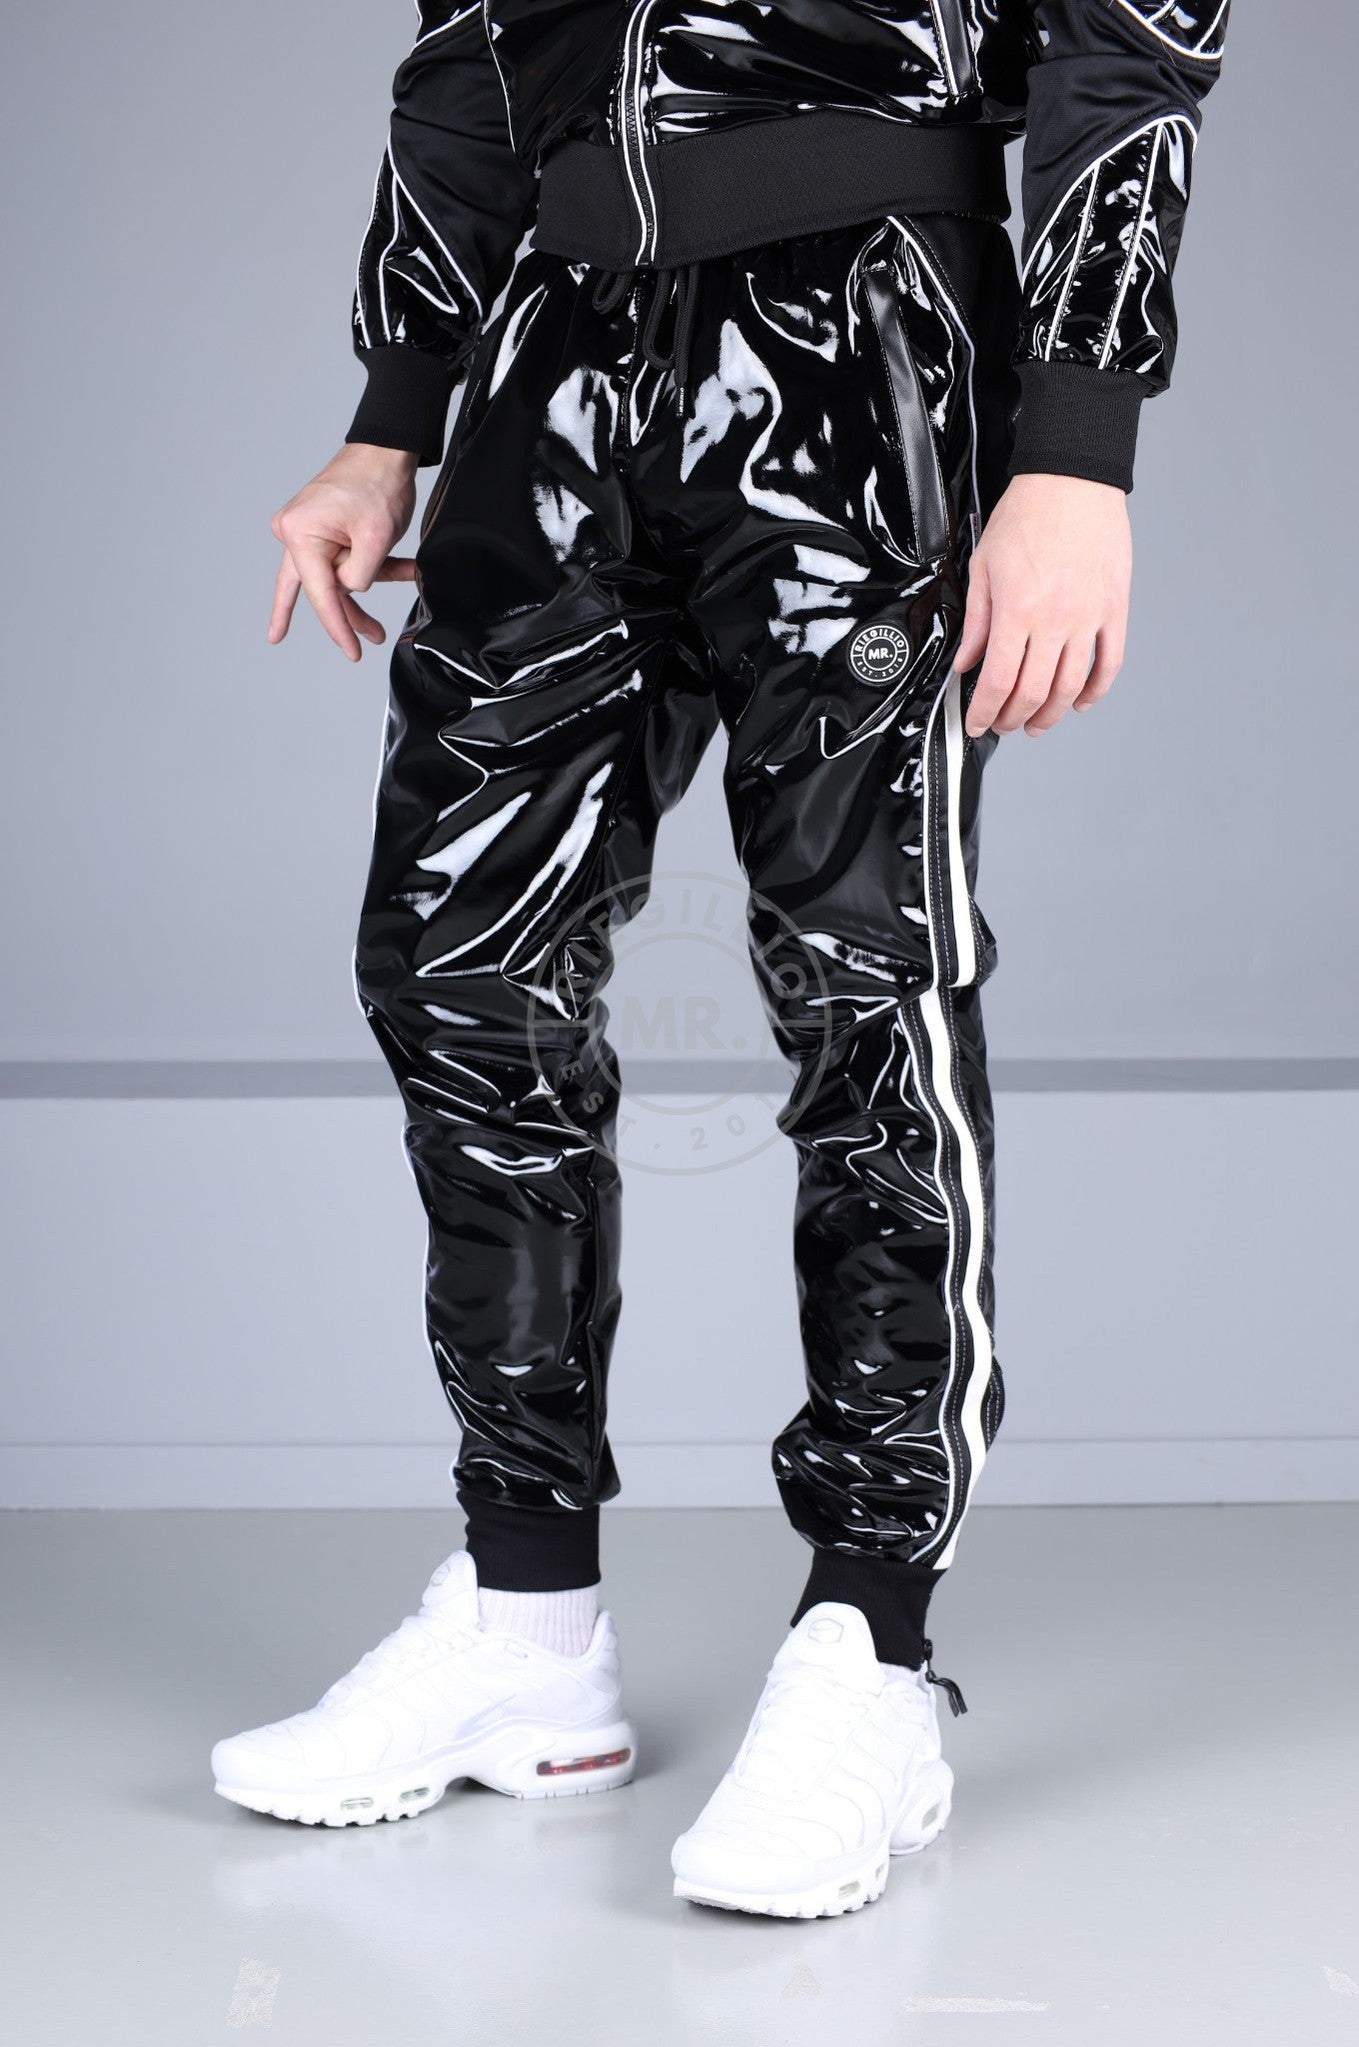 PVC 24 Tracksuit Pants - Black with White Piping at MR. Riegillio